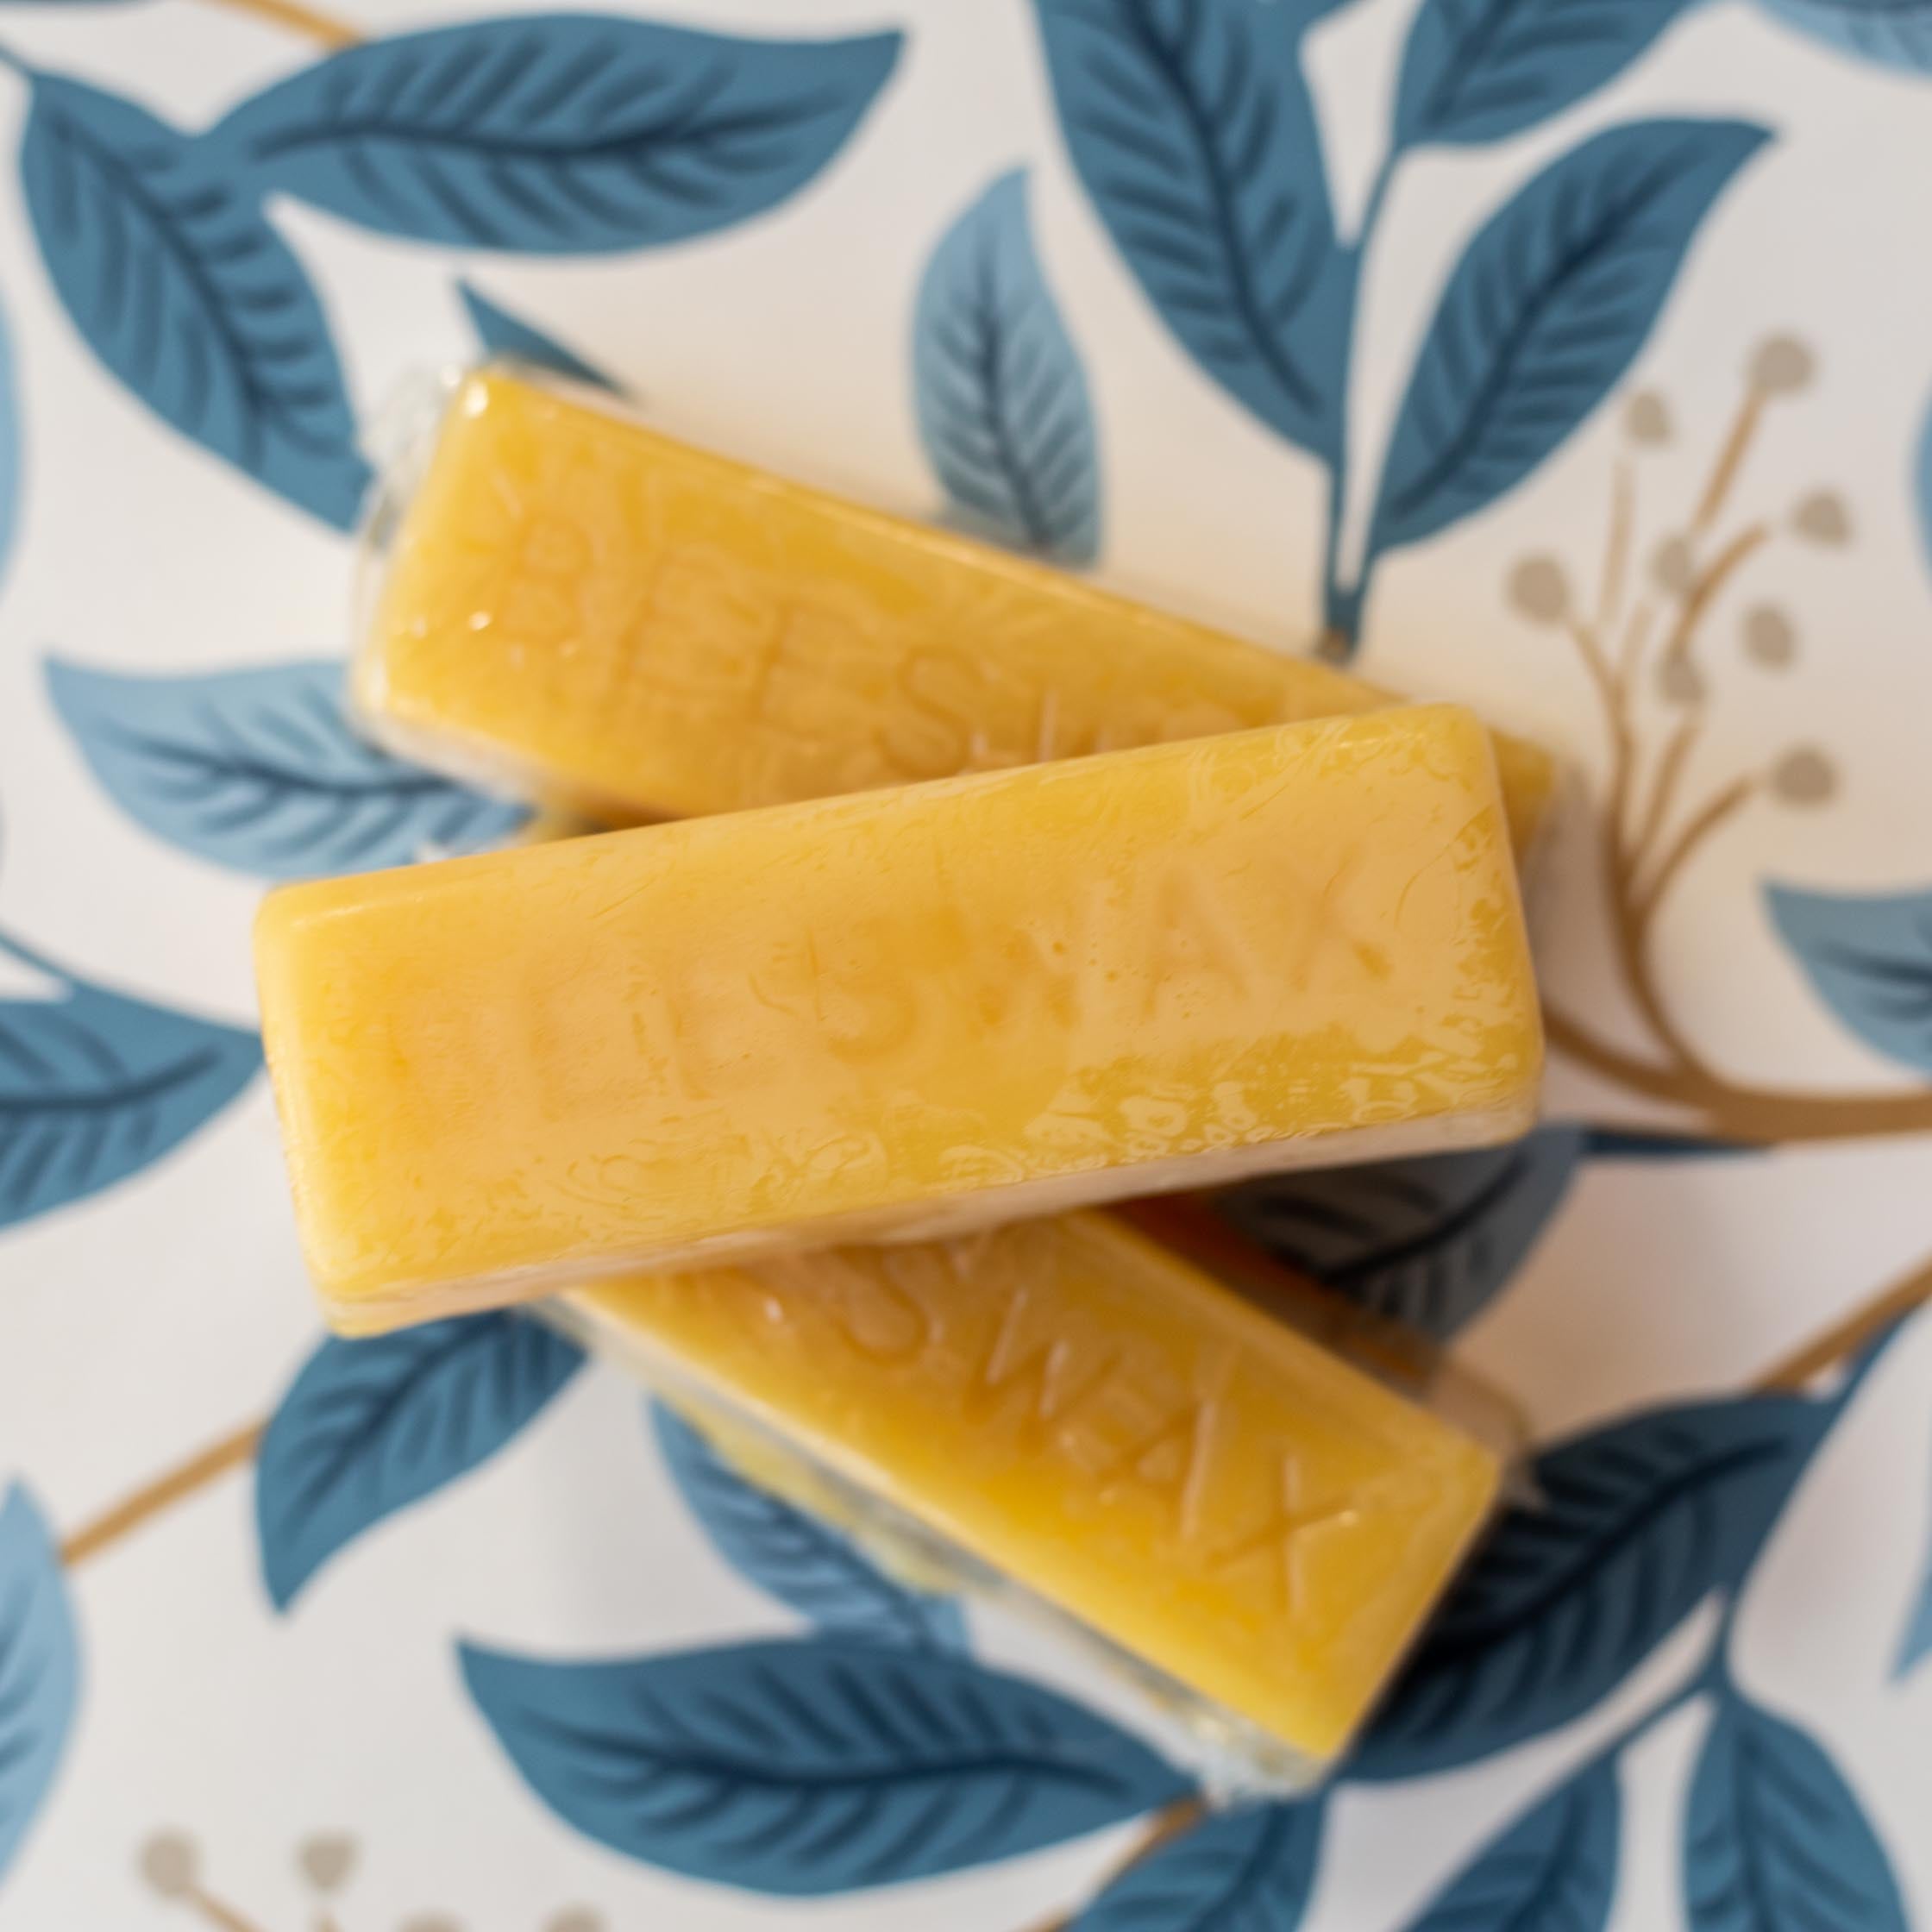 NJ Beeswax Votive Candles from the Beekeepers